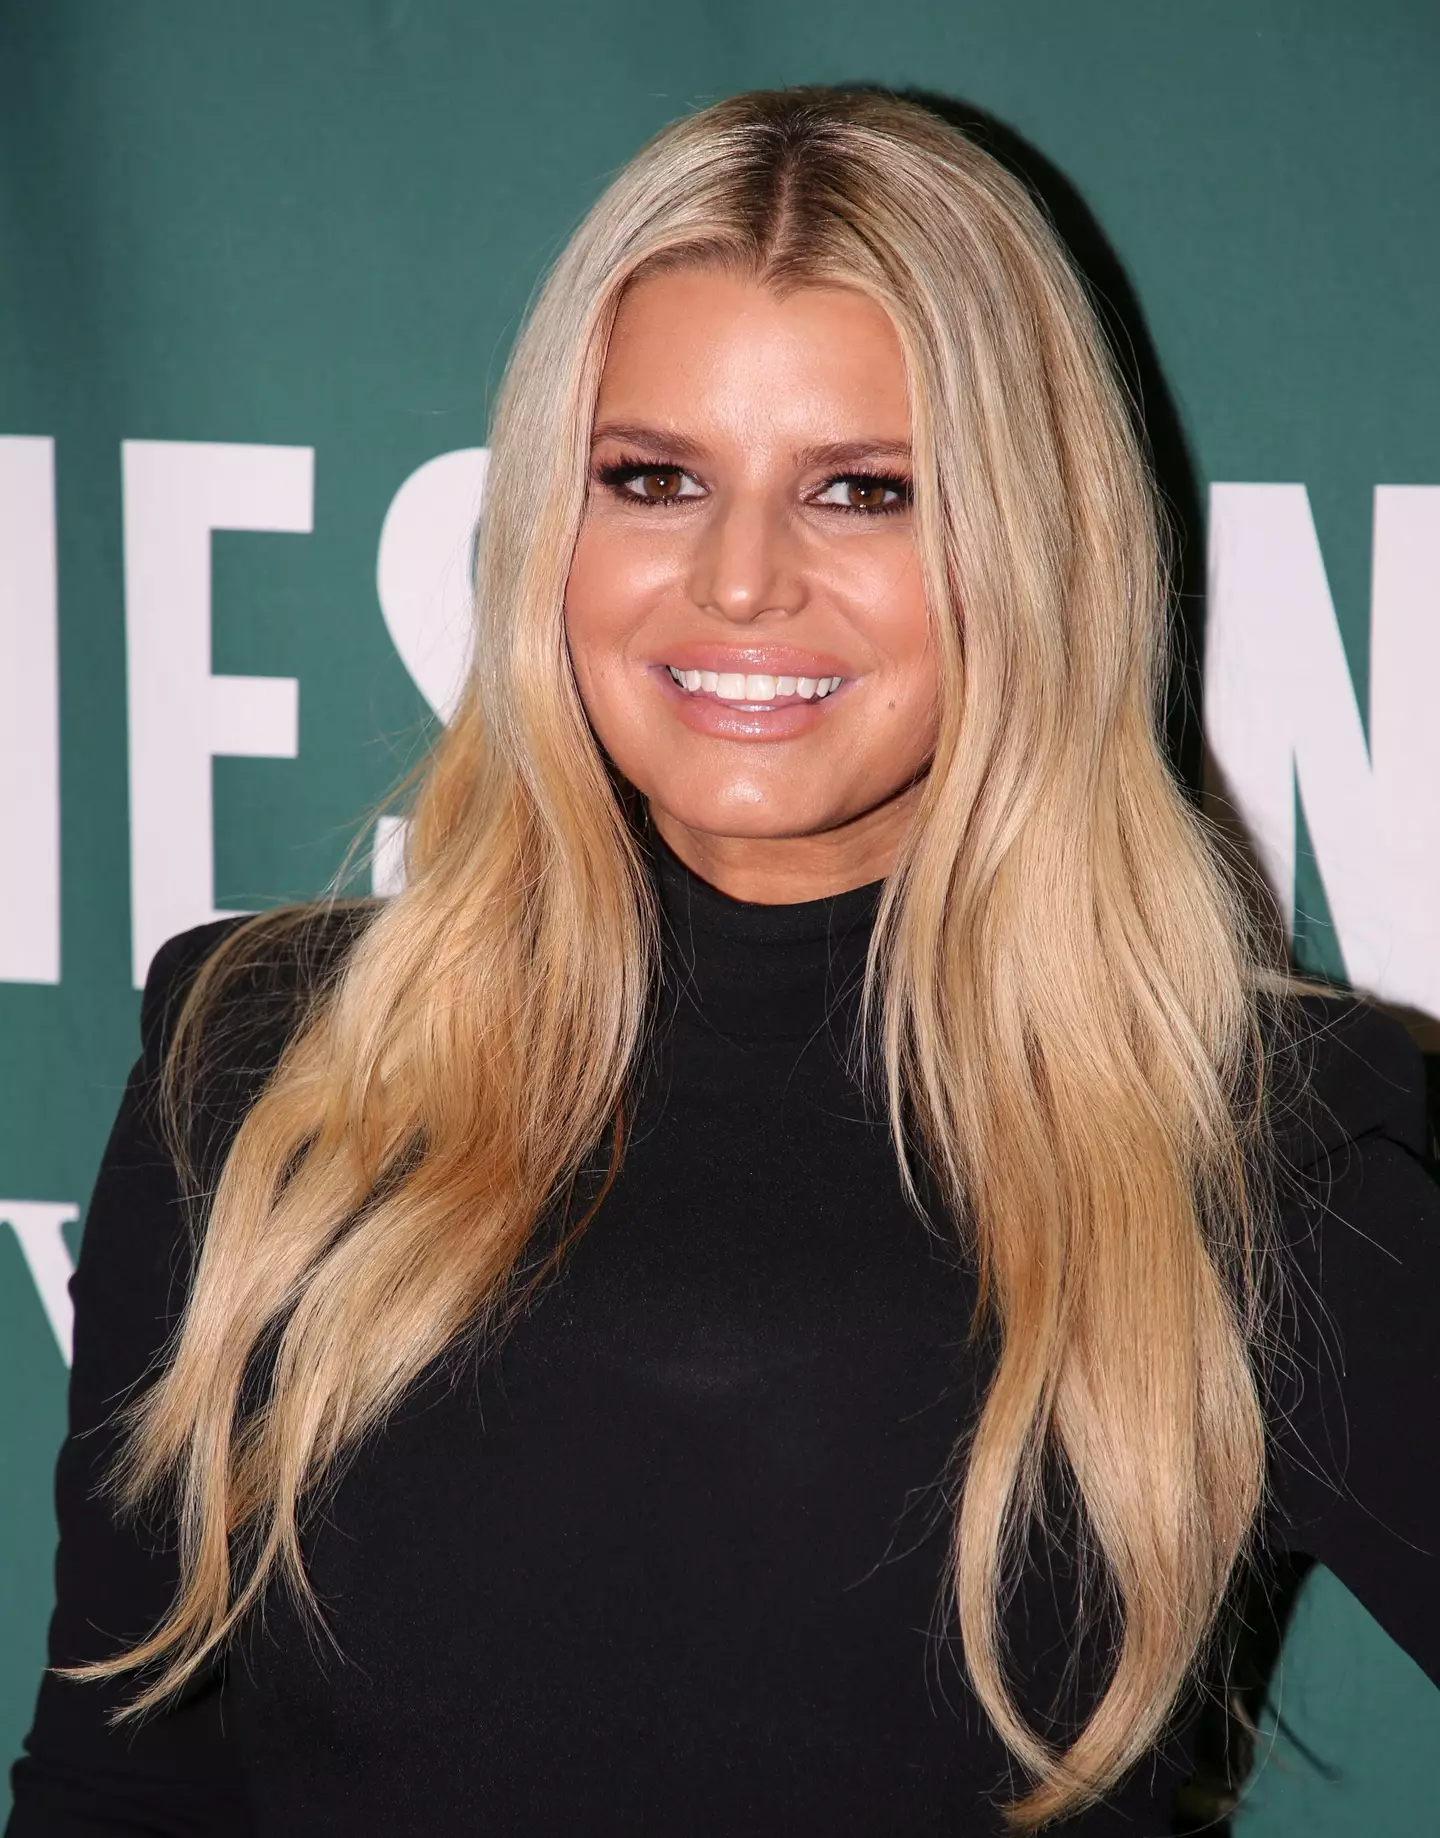 Jessica Simpson also dated Mayer.